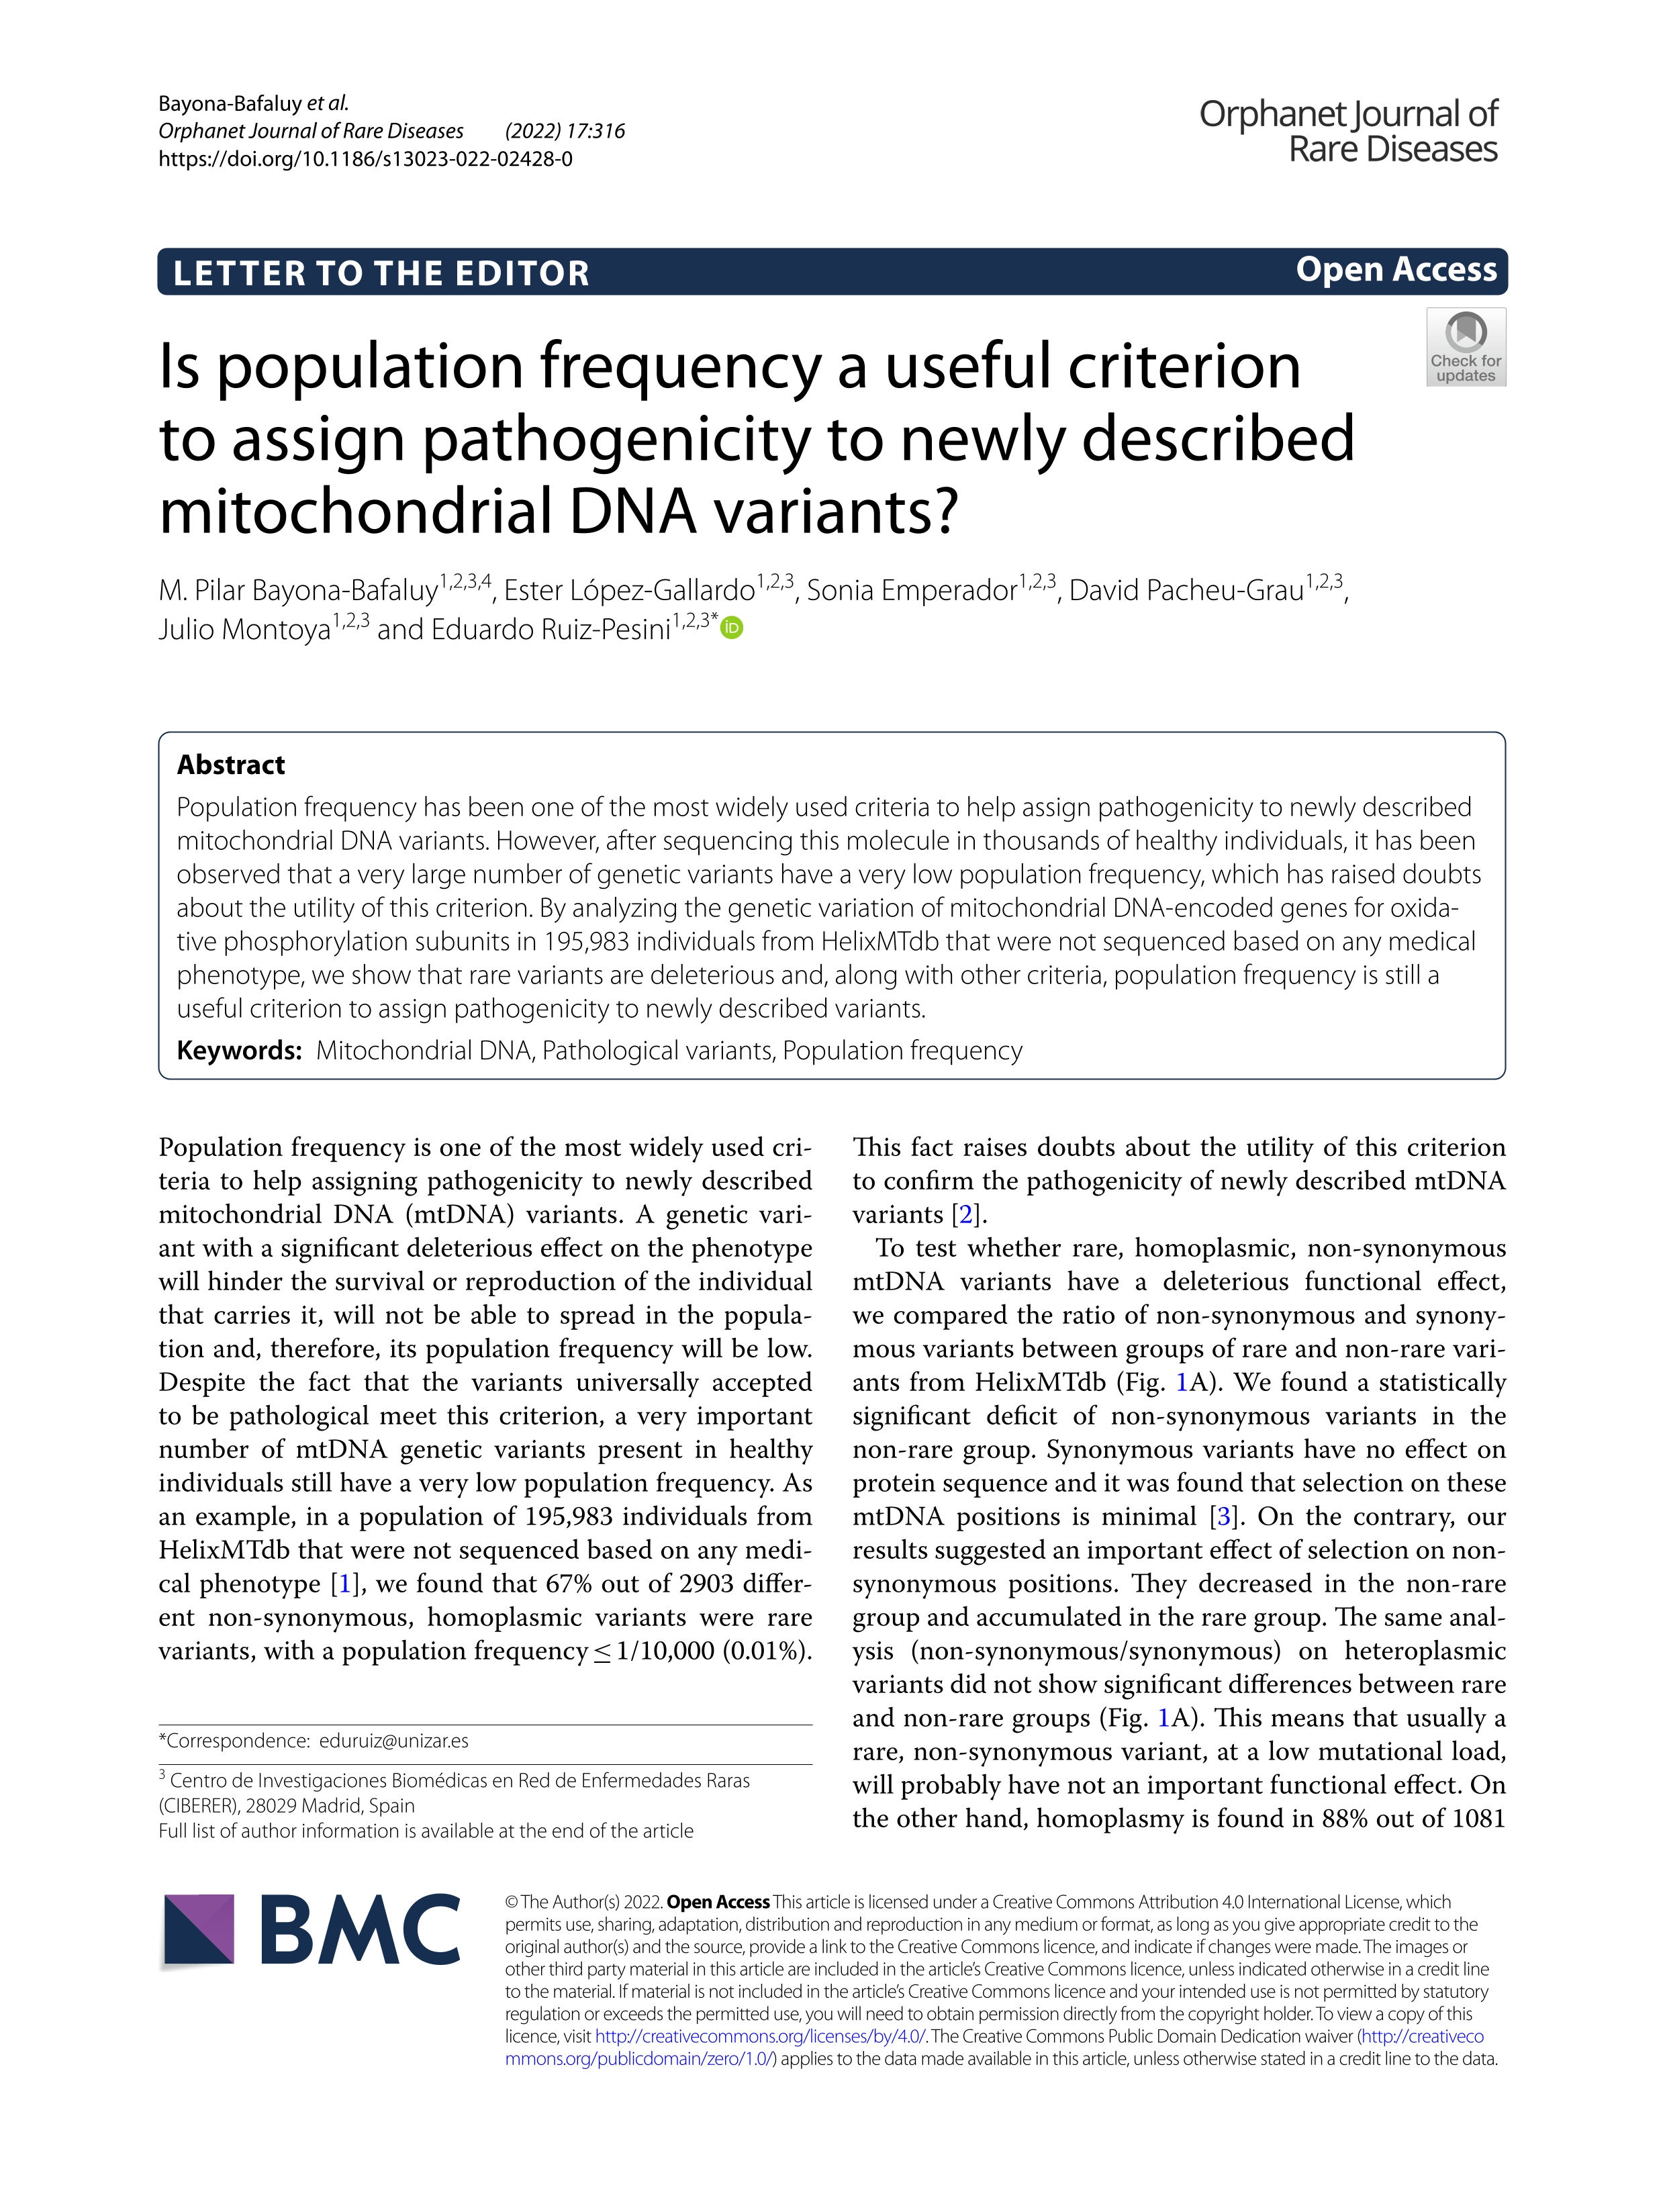 Is population frequency a useful criterion to assign pathogenicity to newly described mitochondrial DNA variants?